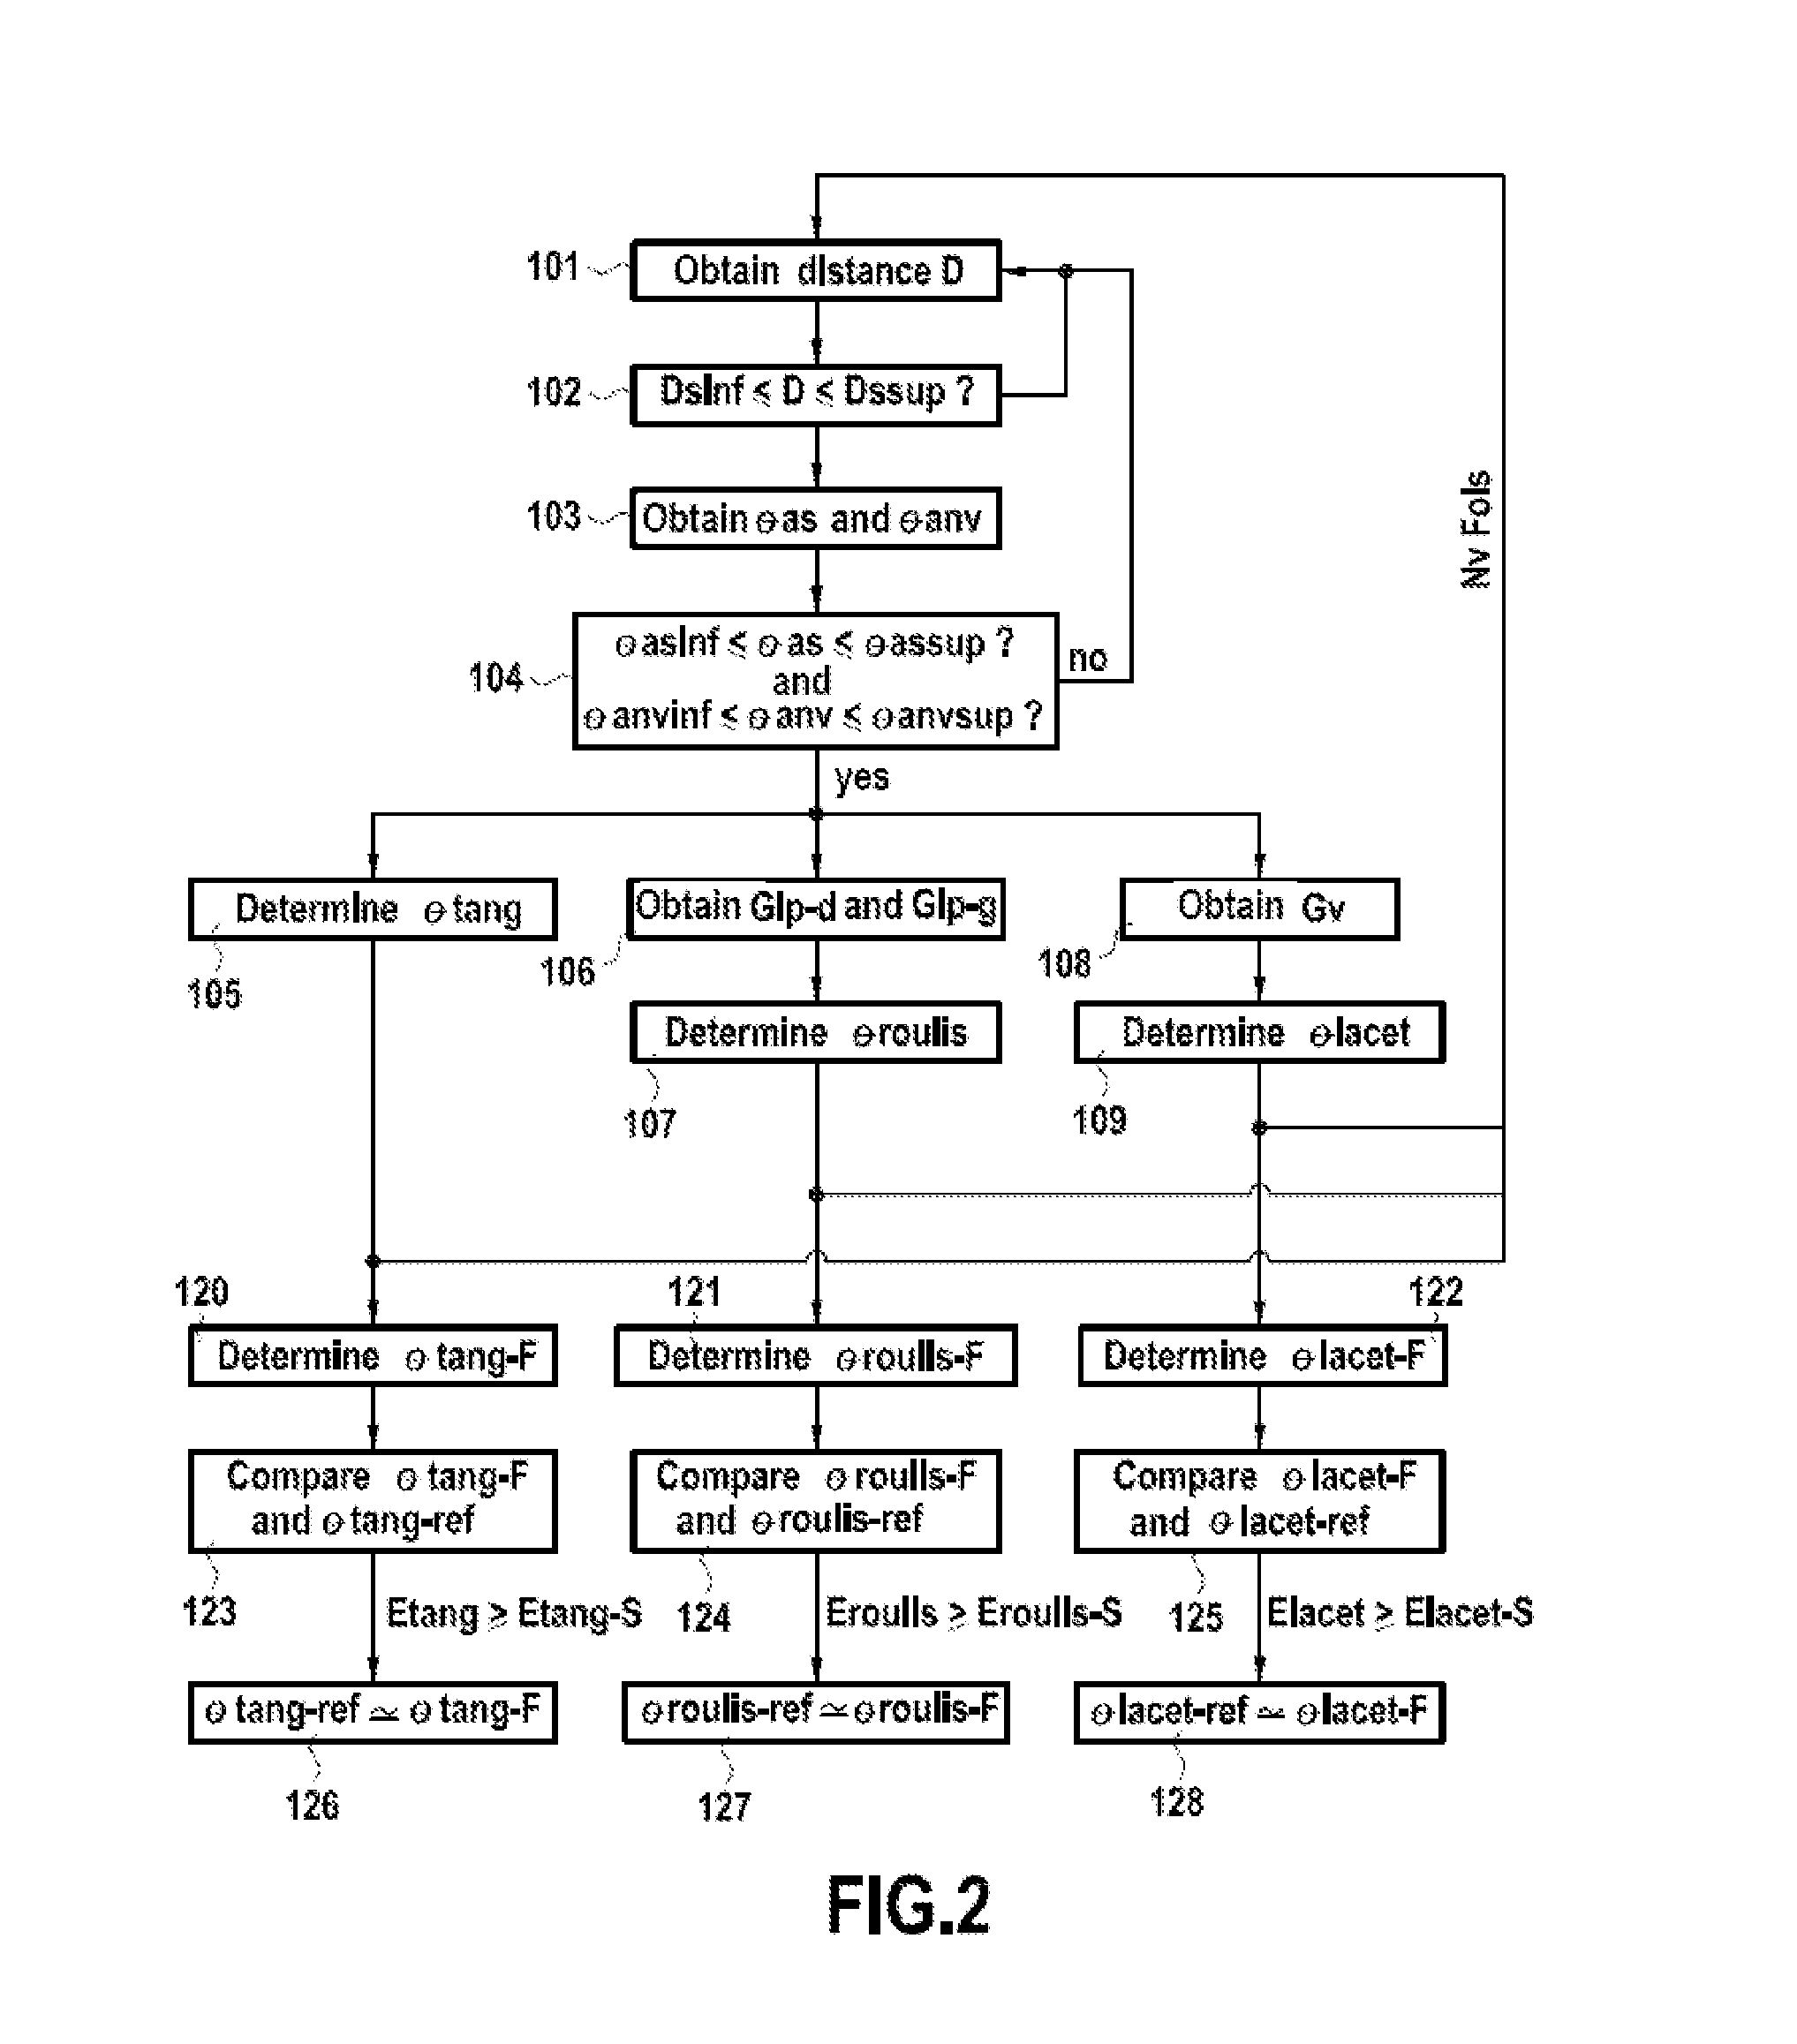 System of gauging a camera suitable for equipping a vehicle